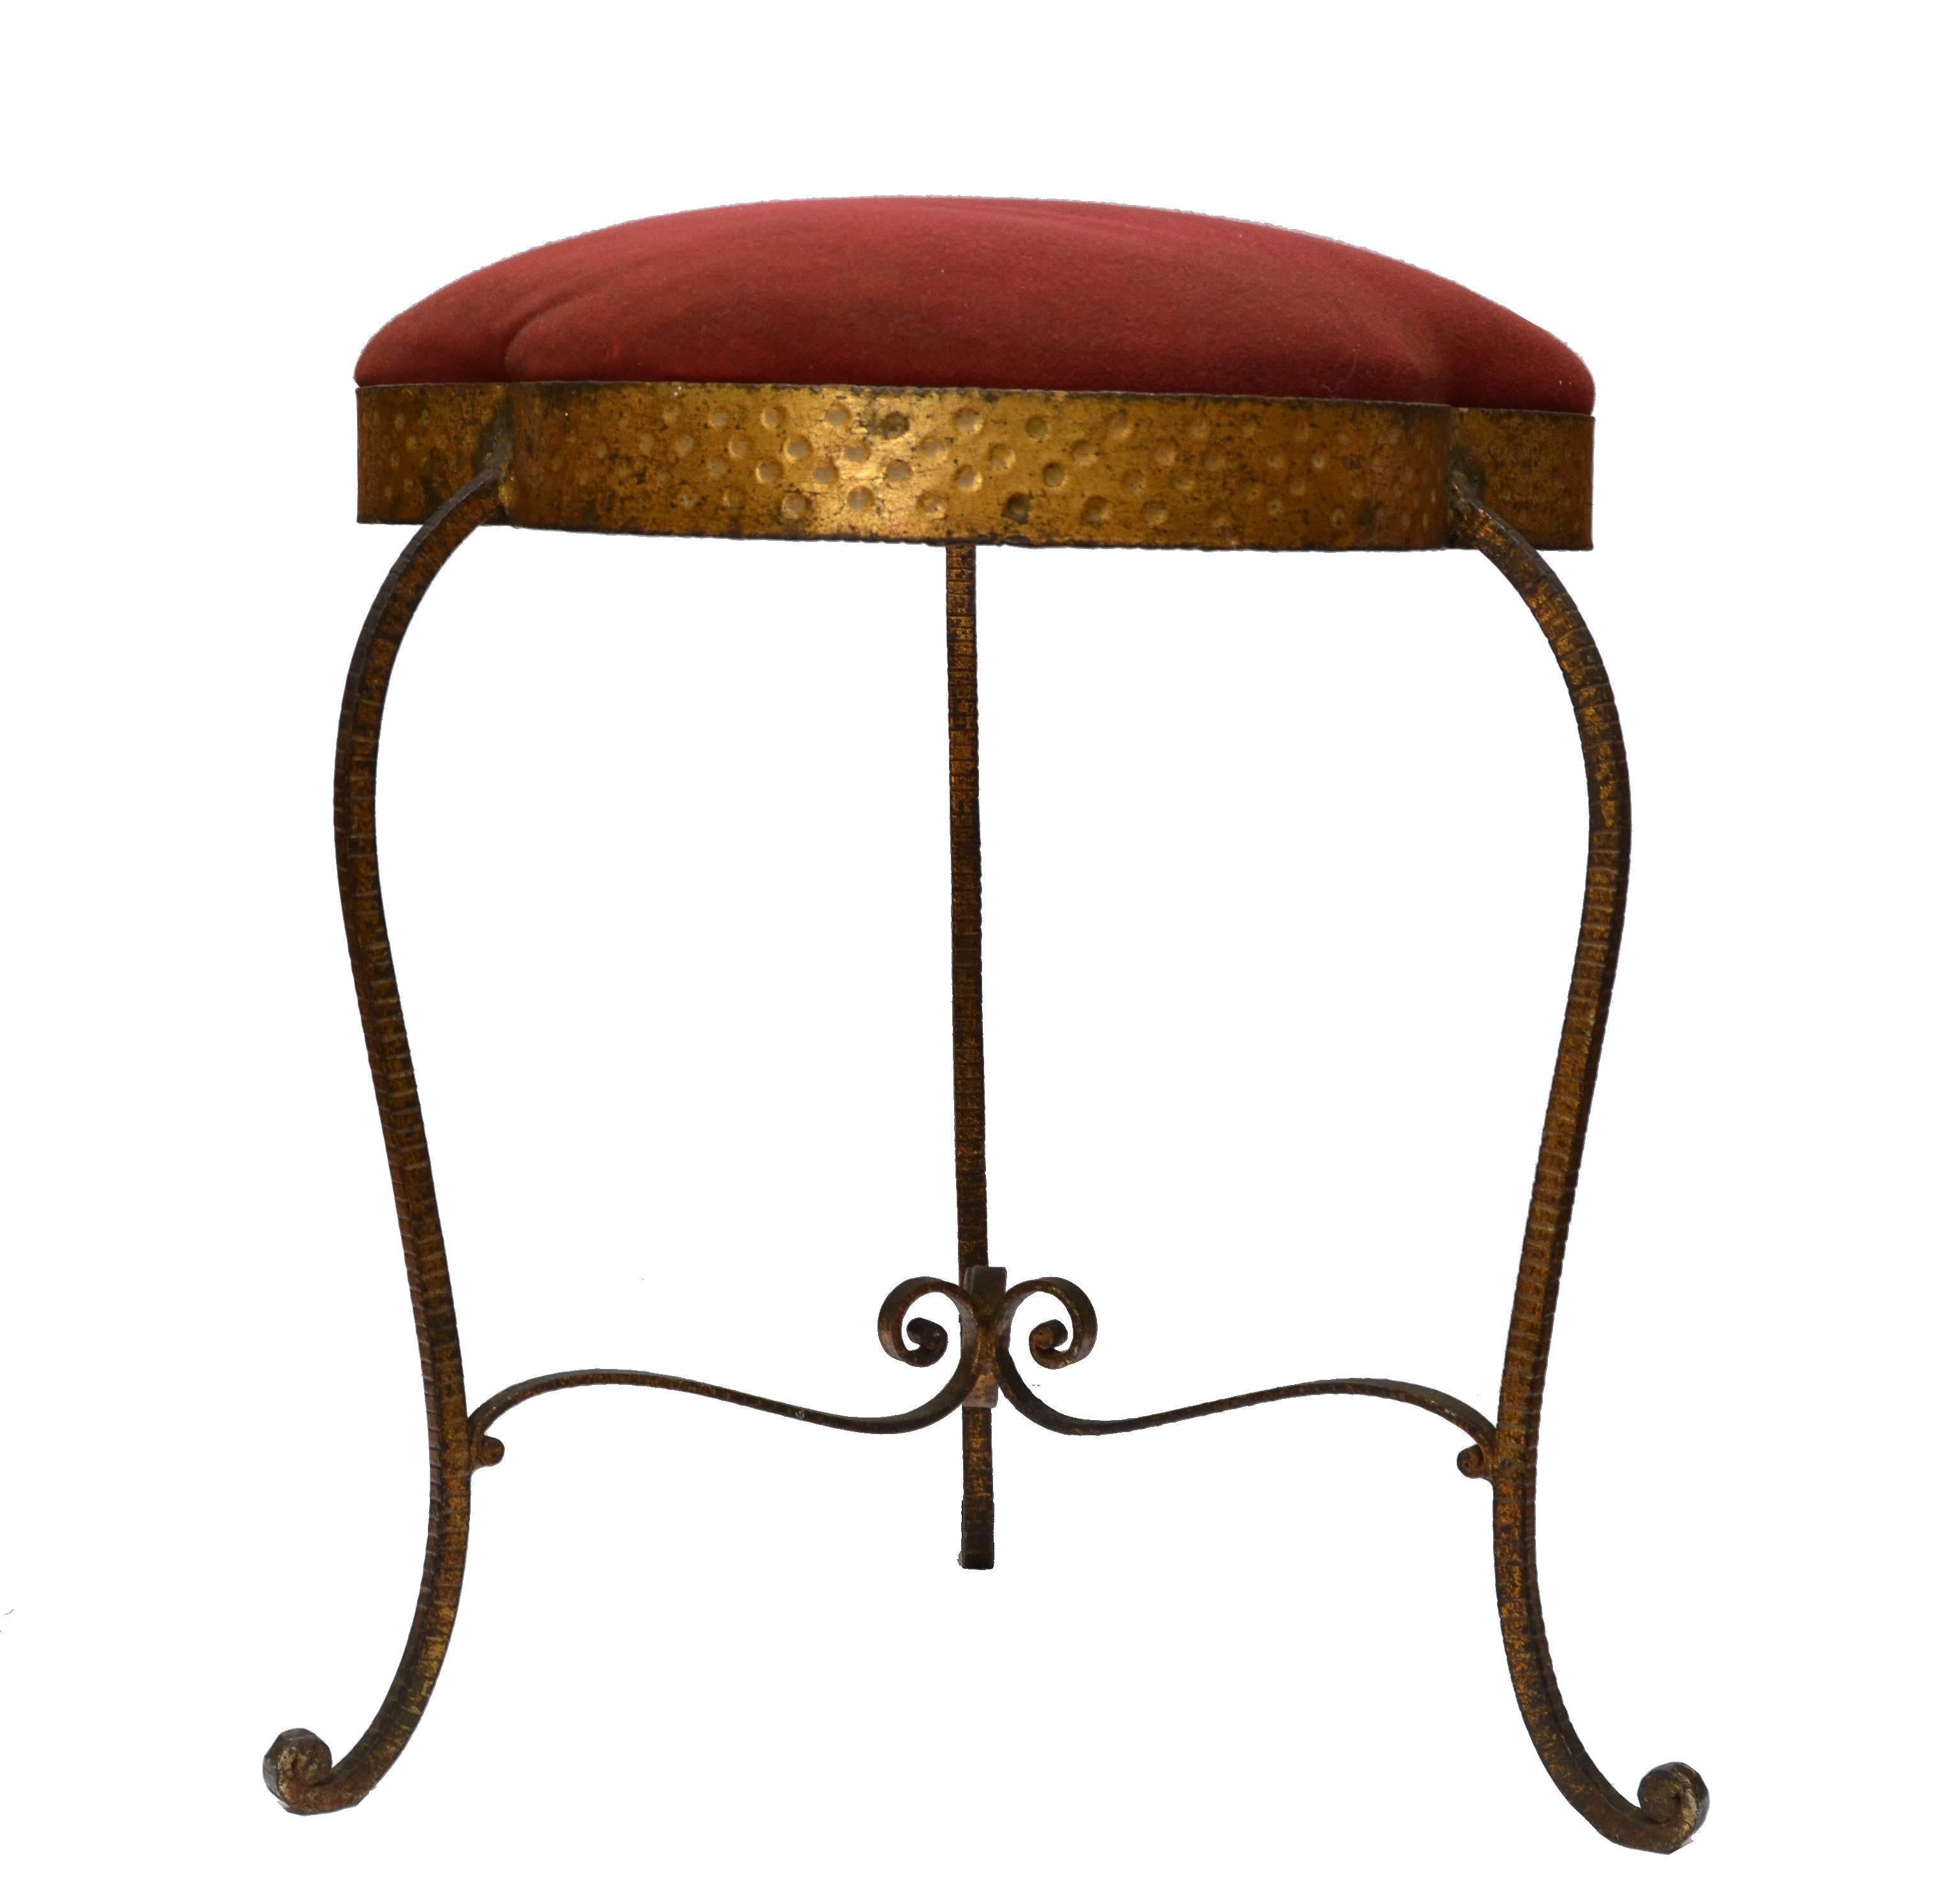 Mid-20th Century Italian Art Deco Style Wrought Iron Gilt Finished Tabouret by Pier Luigi Colli For Sale